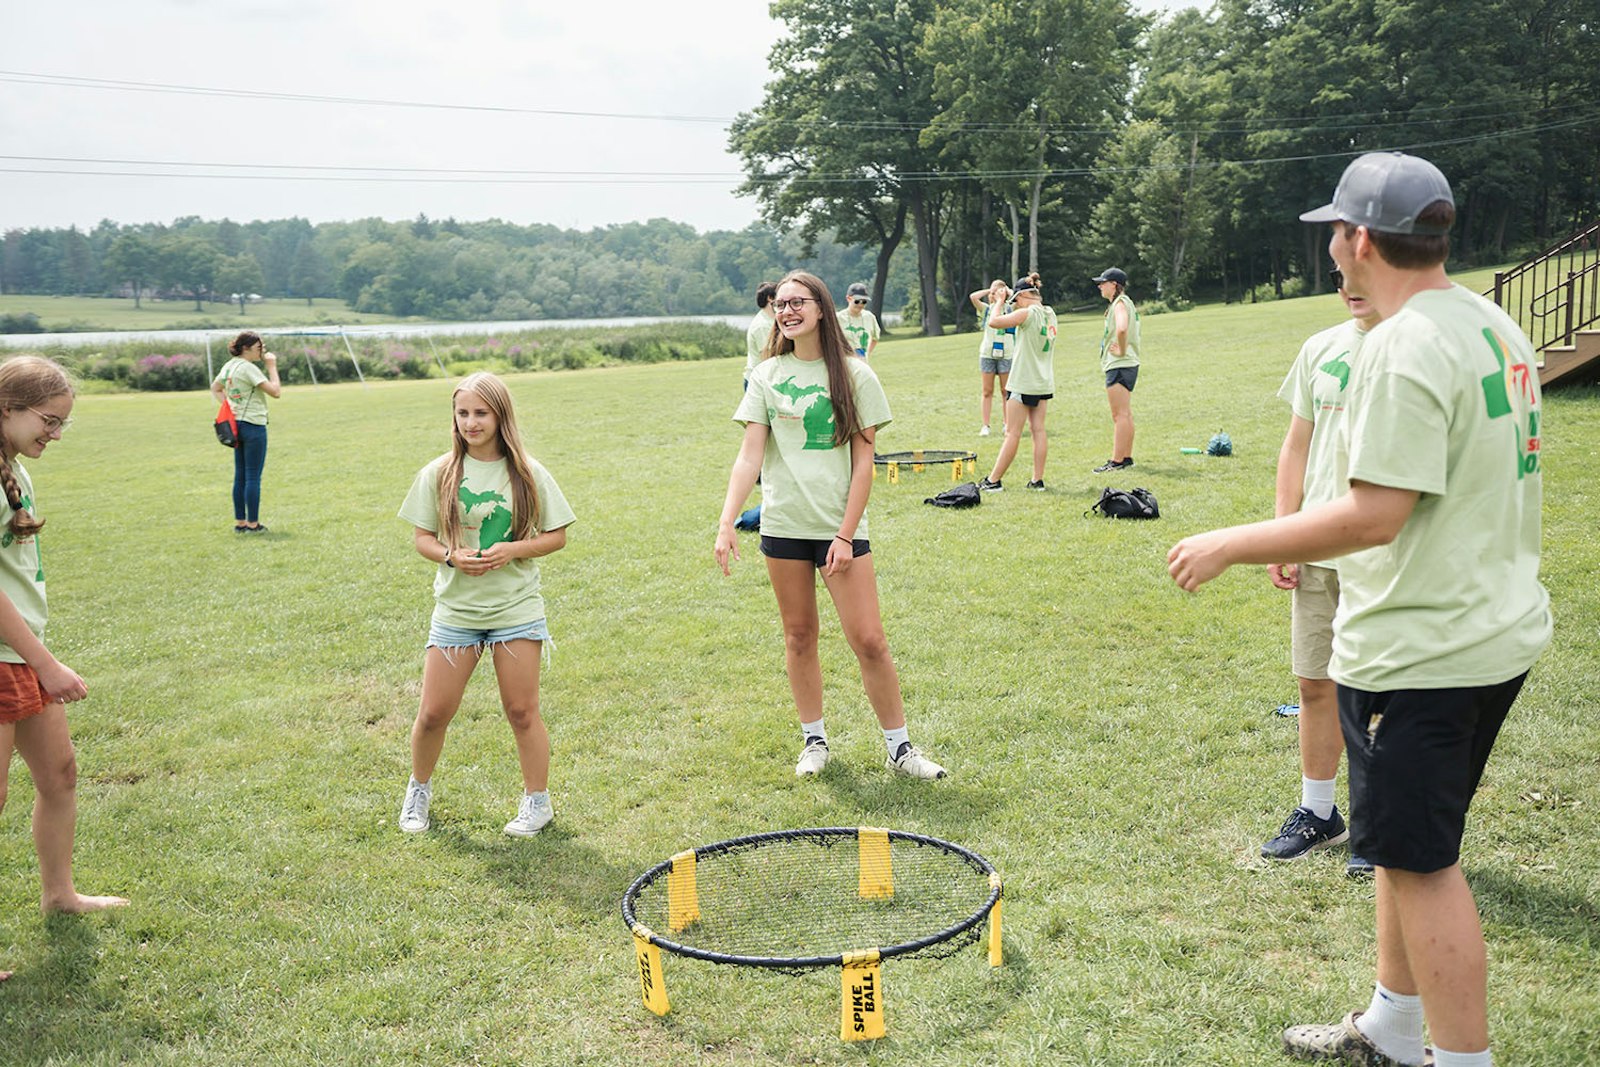 Young people take part in a game of Spikeball at Our Lady of the Fields Camp in Brighton during the World Youth Day "Home" event Aug. 5.